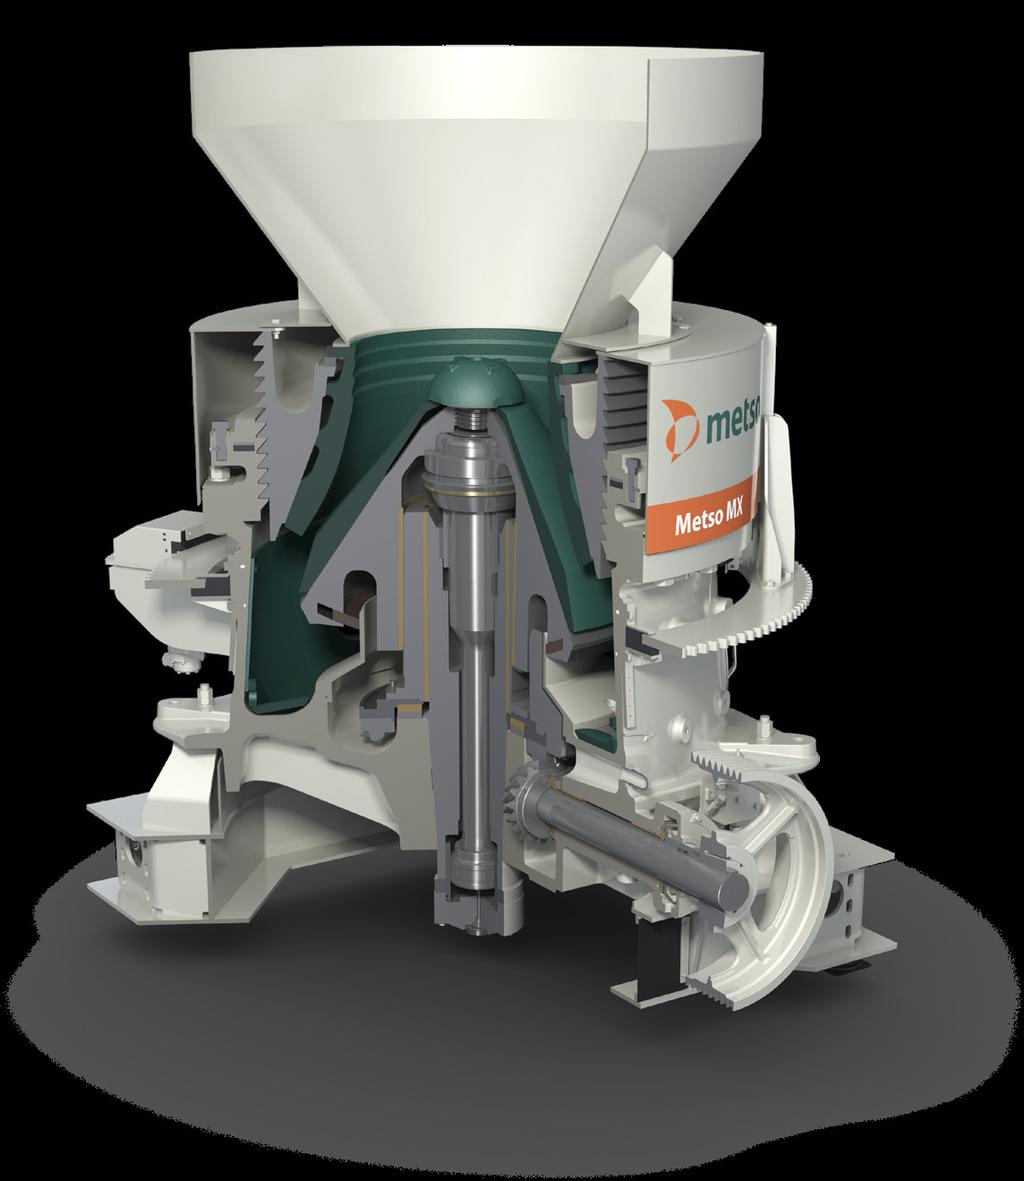 The intelligent crusher VisioRock Compact The crushing quality can be easily measured with Metso s VisioRock photo particle size analyzer that is connected to the IC crusher automation.